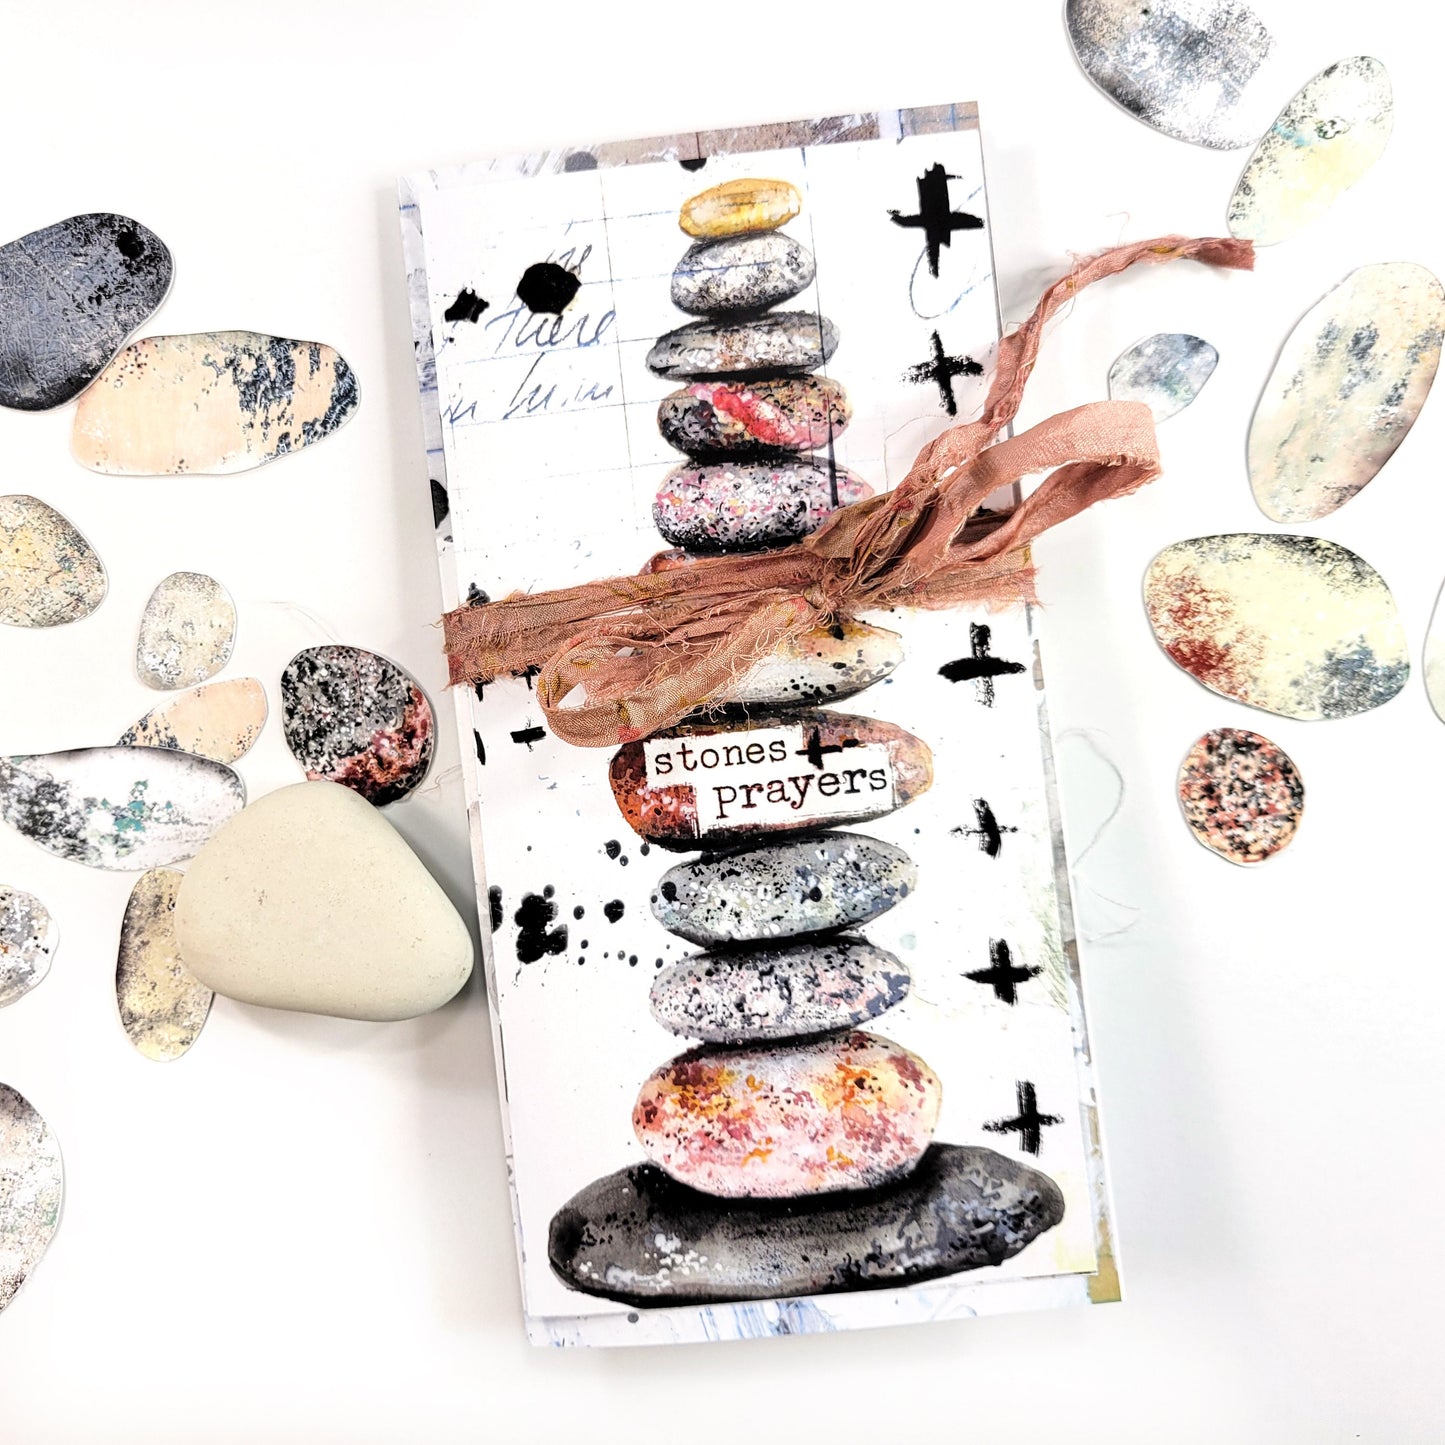 Stones and Prayers - KIDS/YOUTH creative bible study / Bible journaling for kids